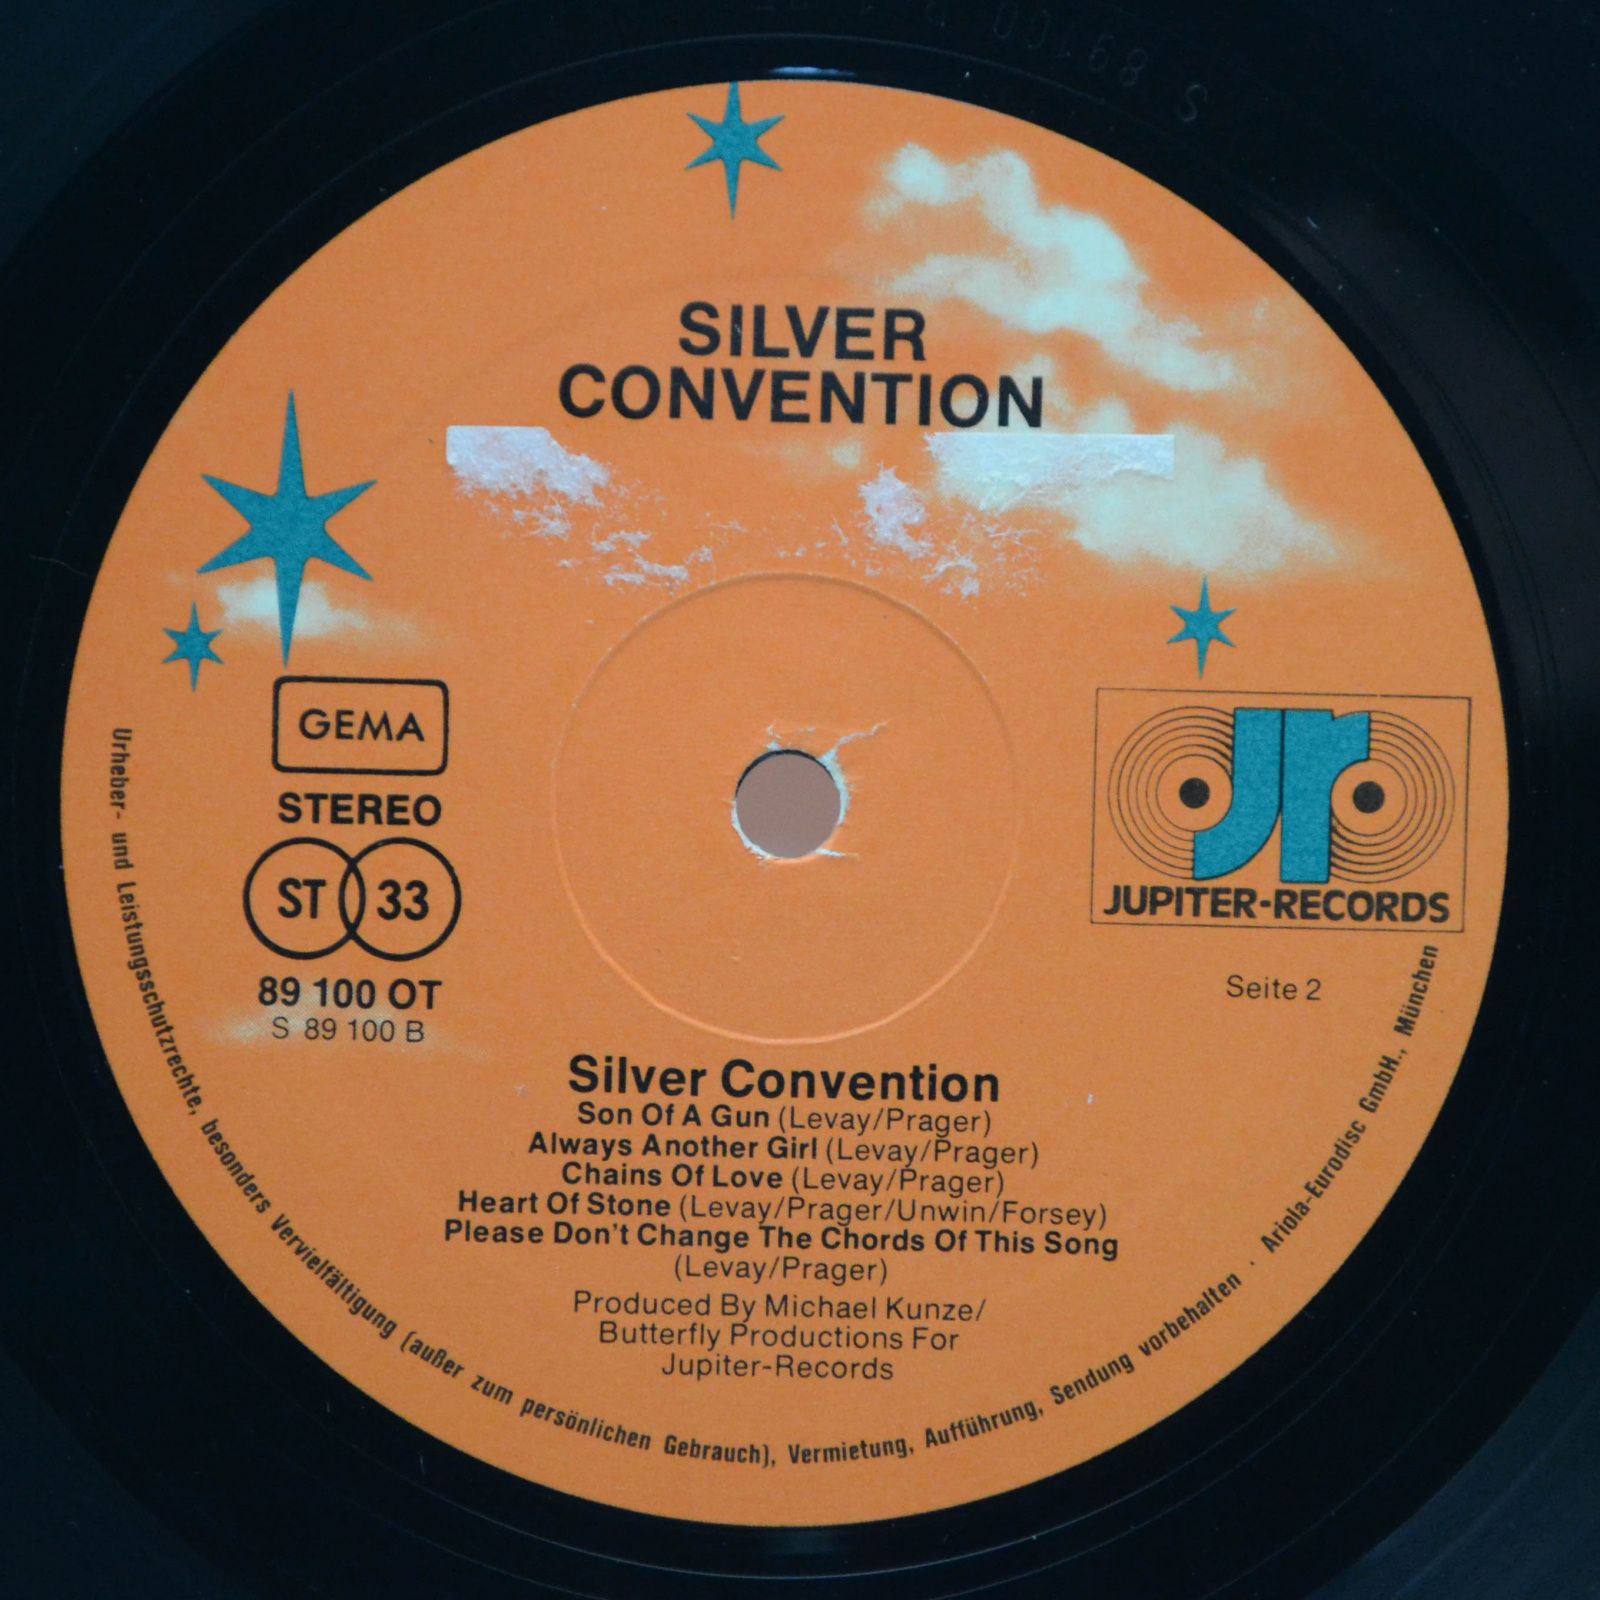 Silver Convention — Silver Convention, 1975